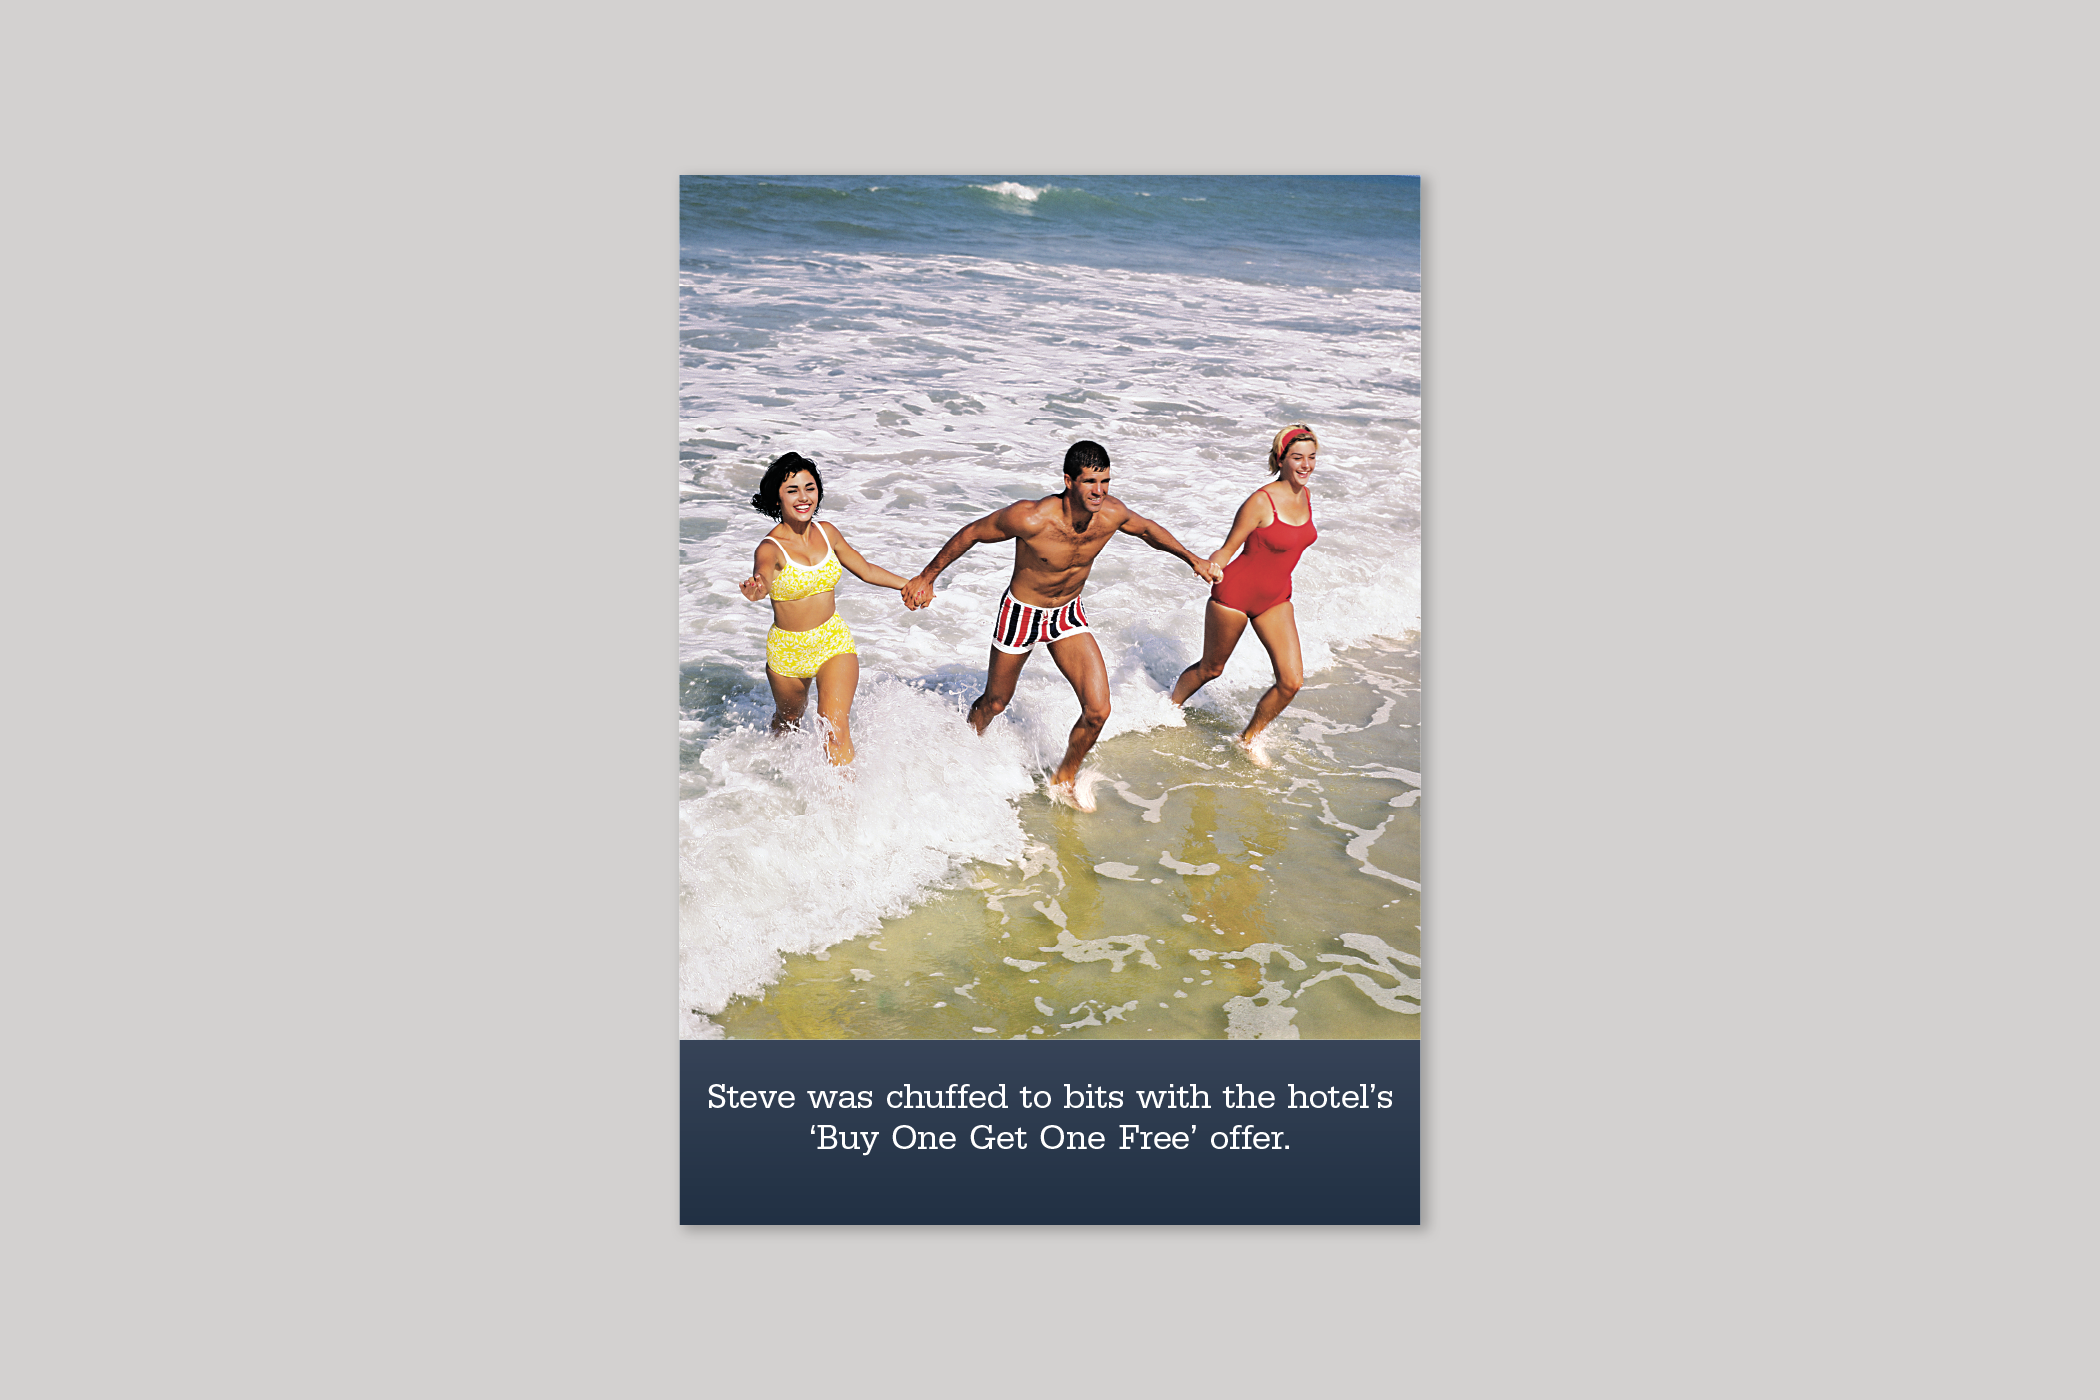 Hotel Offer from Blush humour range of greeting cards by Icon.